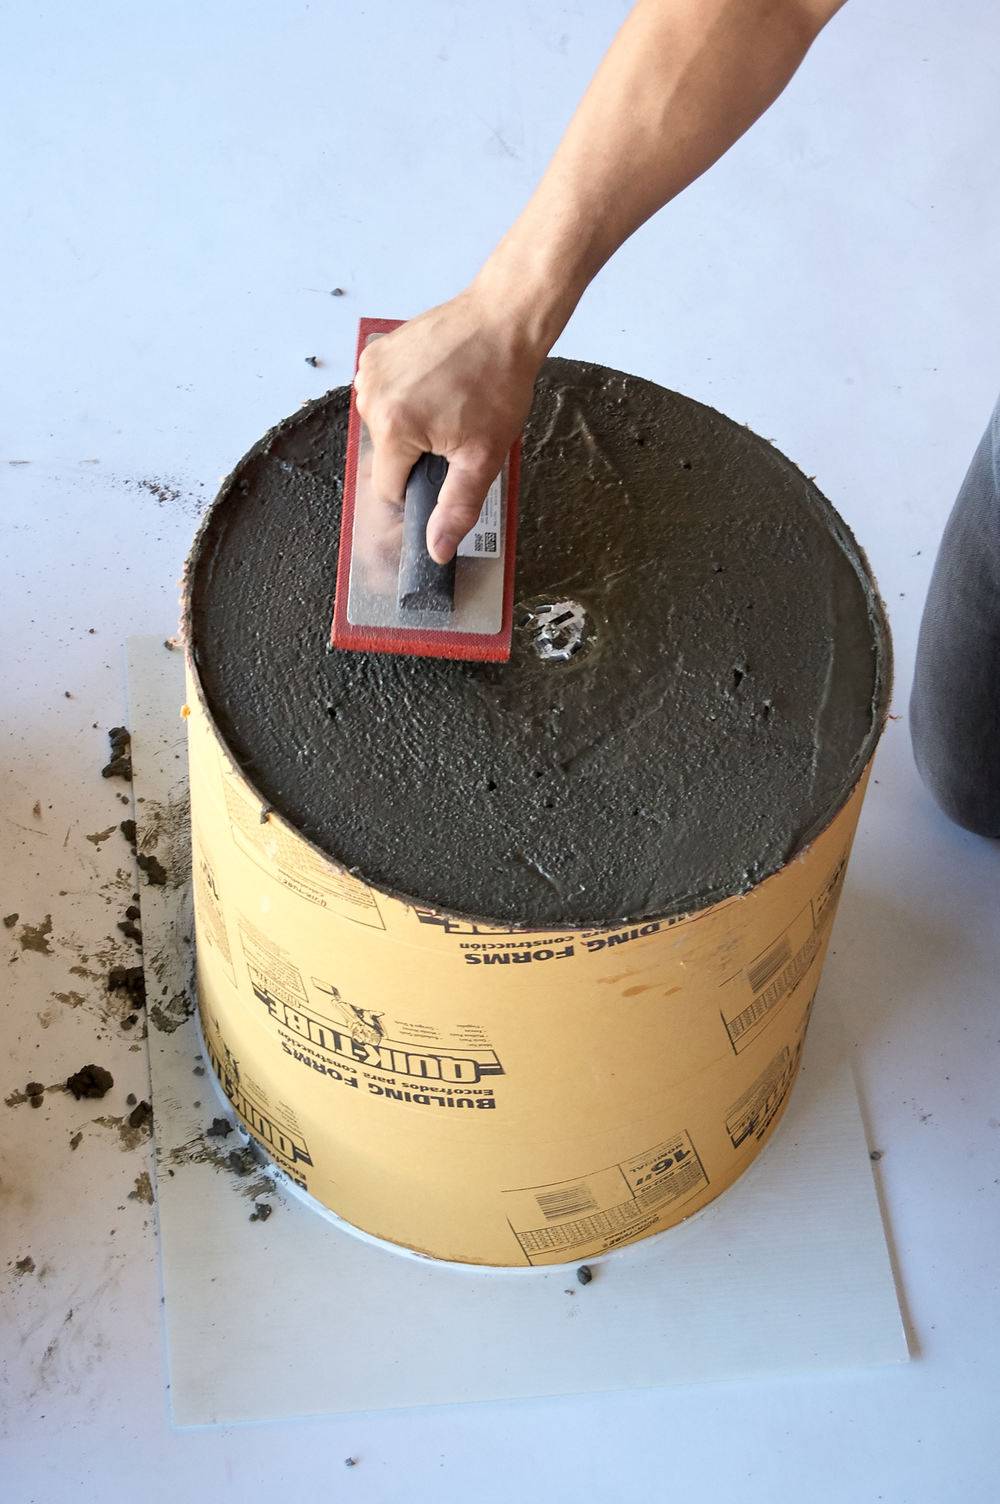 A person uses a trowel to flatten the surface and smooth the surface of concrete in a large container.